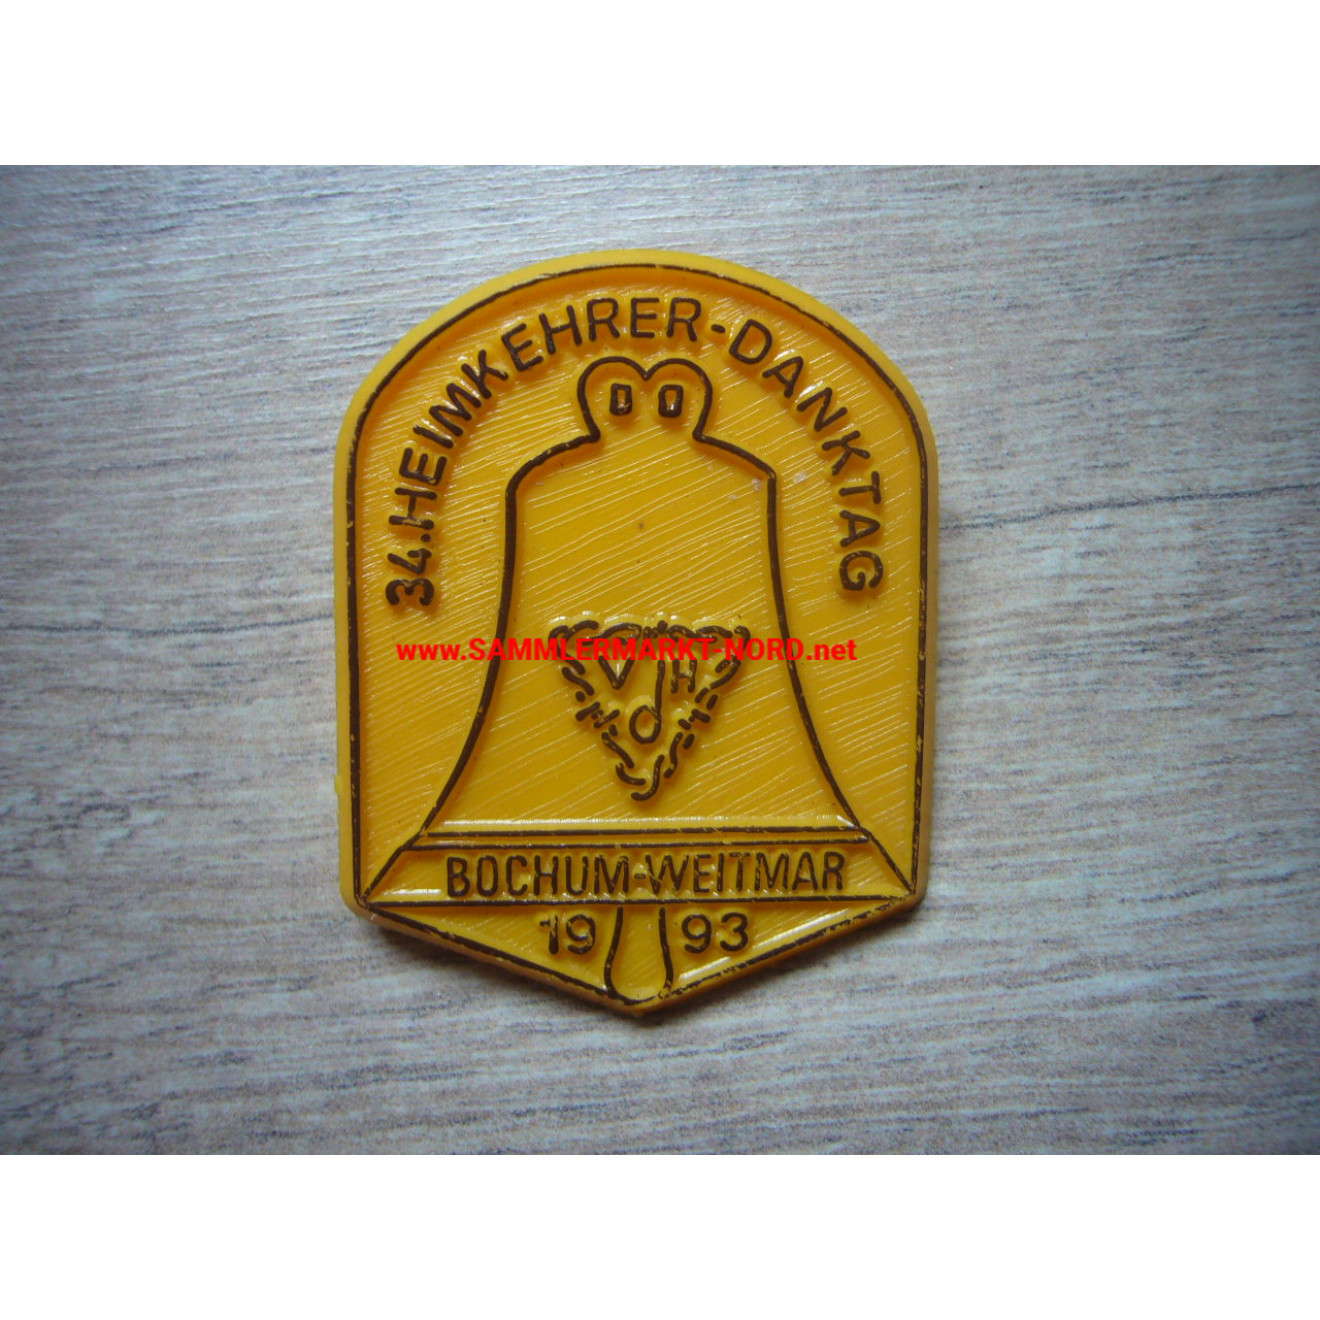 VdH Association of Homecomers - 34th Homecomers' Day, Bochum 1993